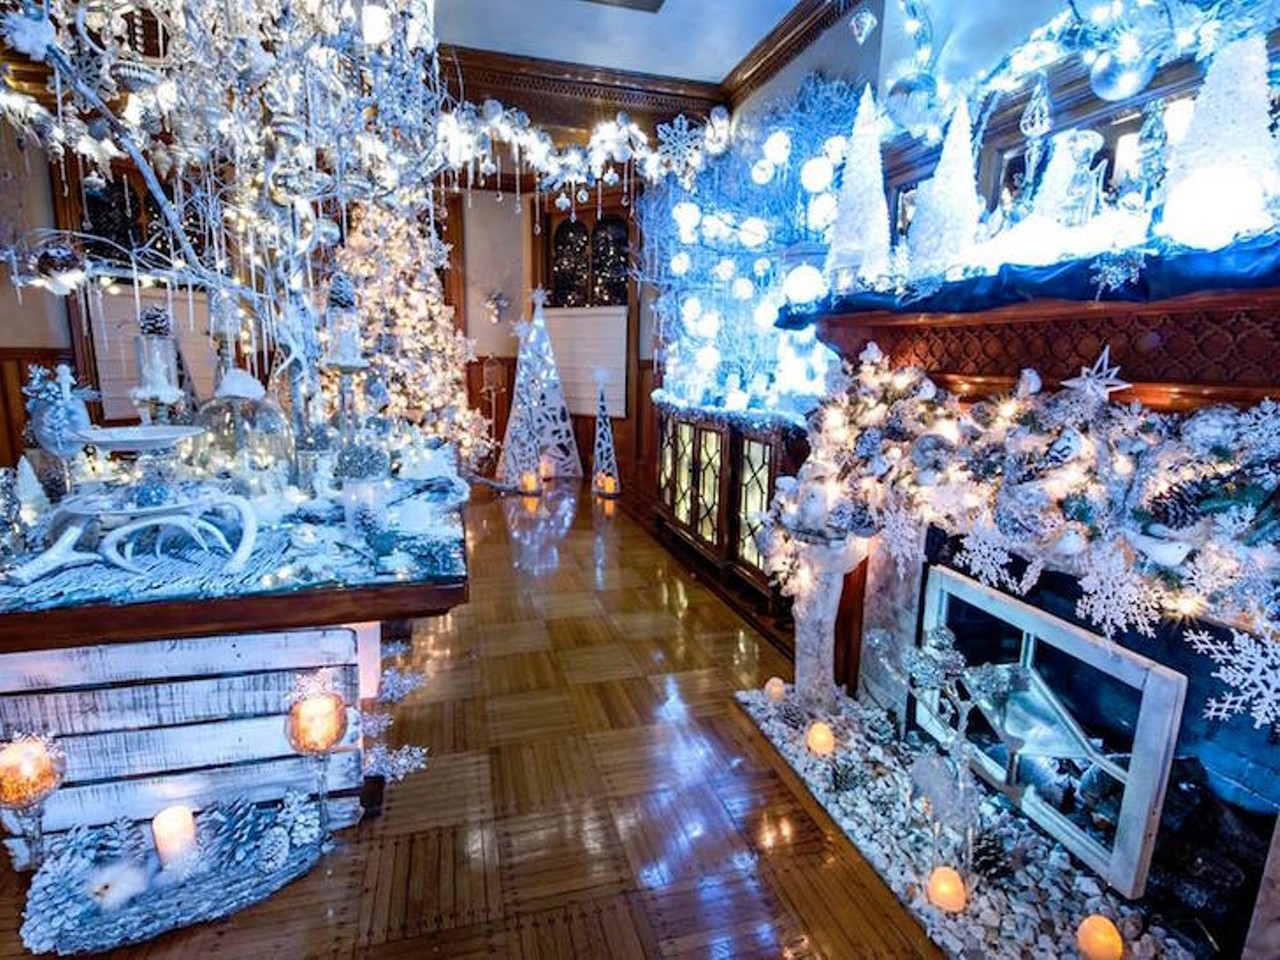 Stetson Mansion
1031 Camphor Lane, Deland 
November 15, 2017 - January 15, 2018
There&#146;s the way your mom decorates her house, and then there&#146;s the way the Stetson Mansion decks the halls. Taking a tour of this vintage home is nothing short of awe-inspiring. Put on your festive walking shoes and take a tour at either 10:30 a.m., 1:30 p.m., or 5:00 p.m. daily.
Photo via Stetson Mansion Tours/Facebook